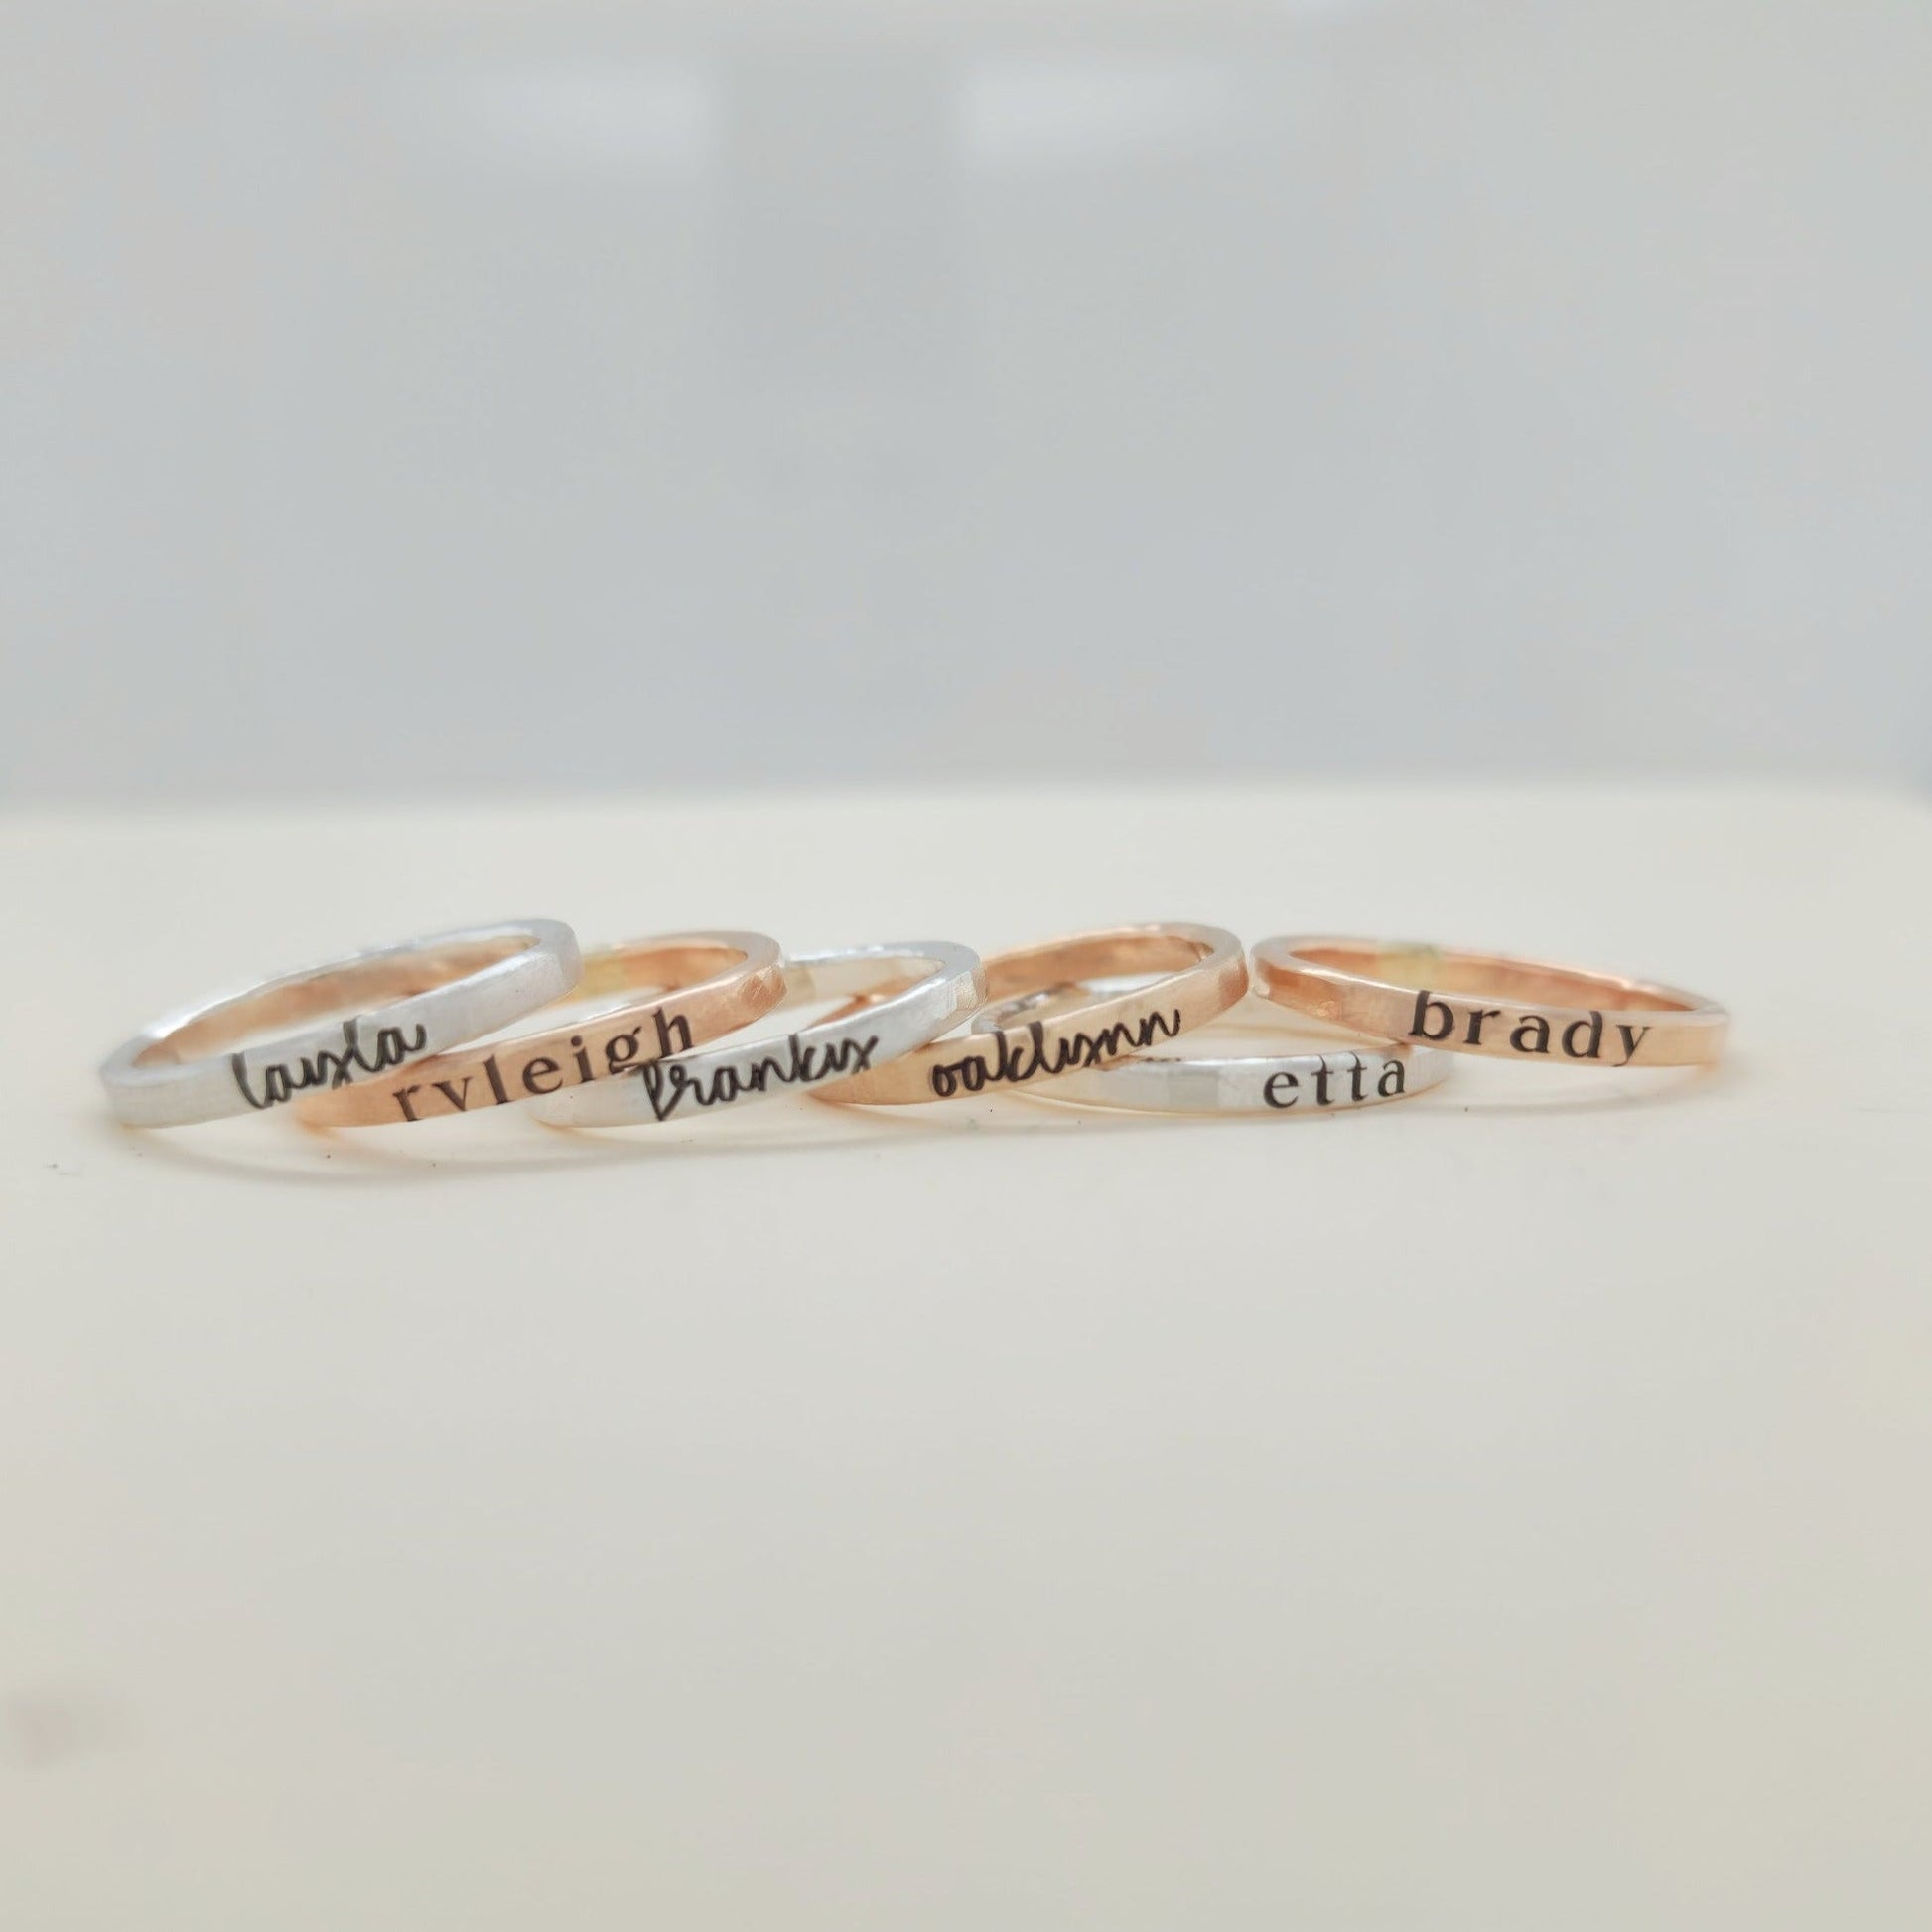 Modern Personalized Stacking Ring - Going Golden